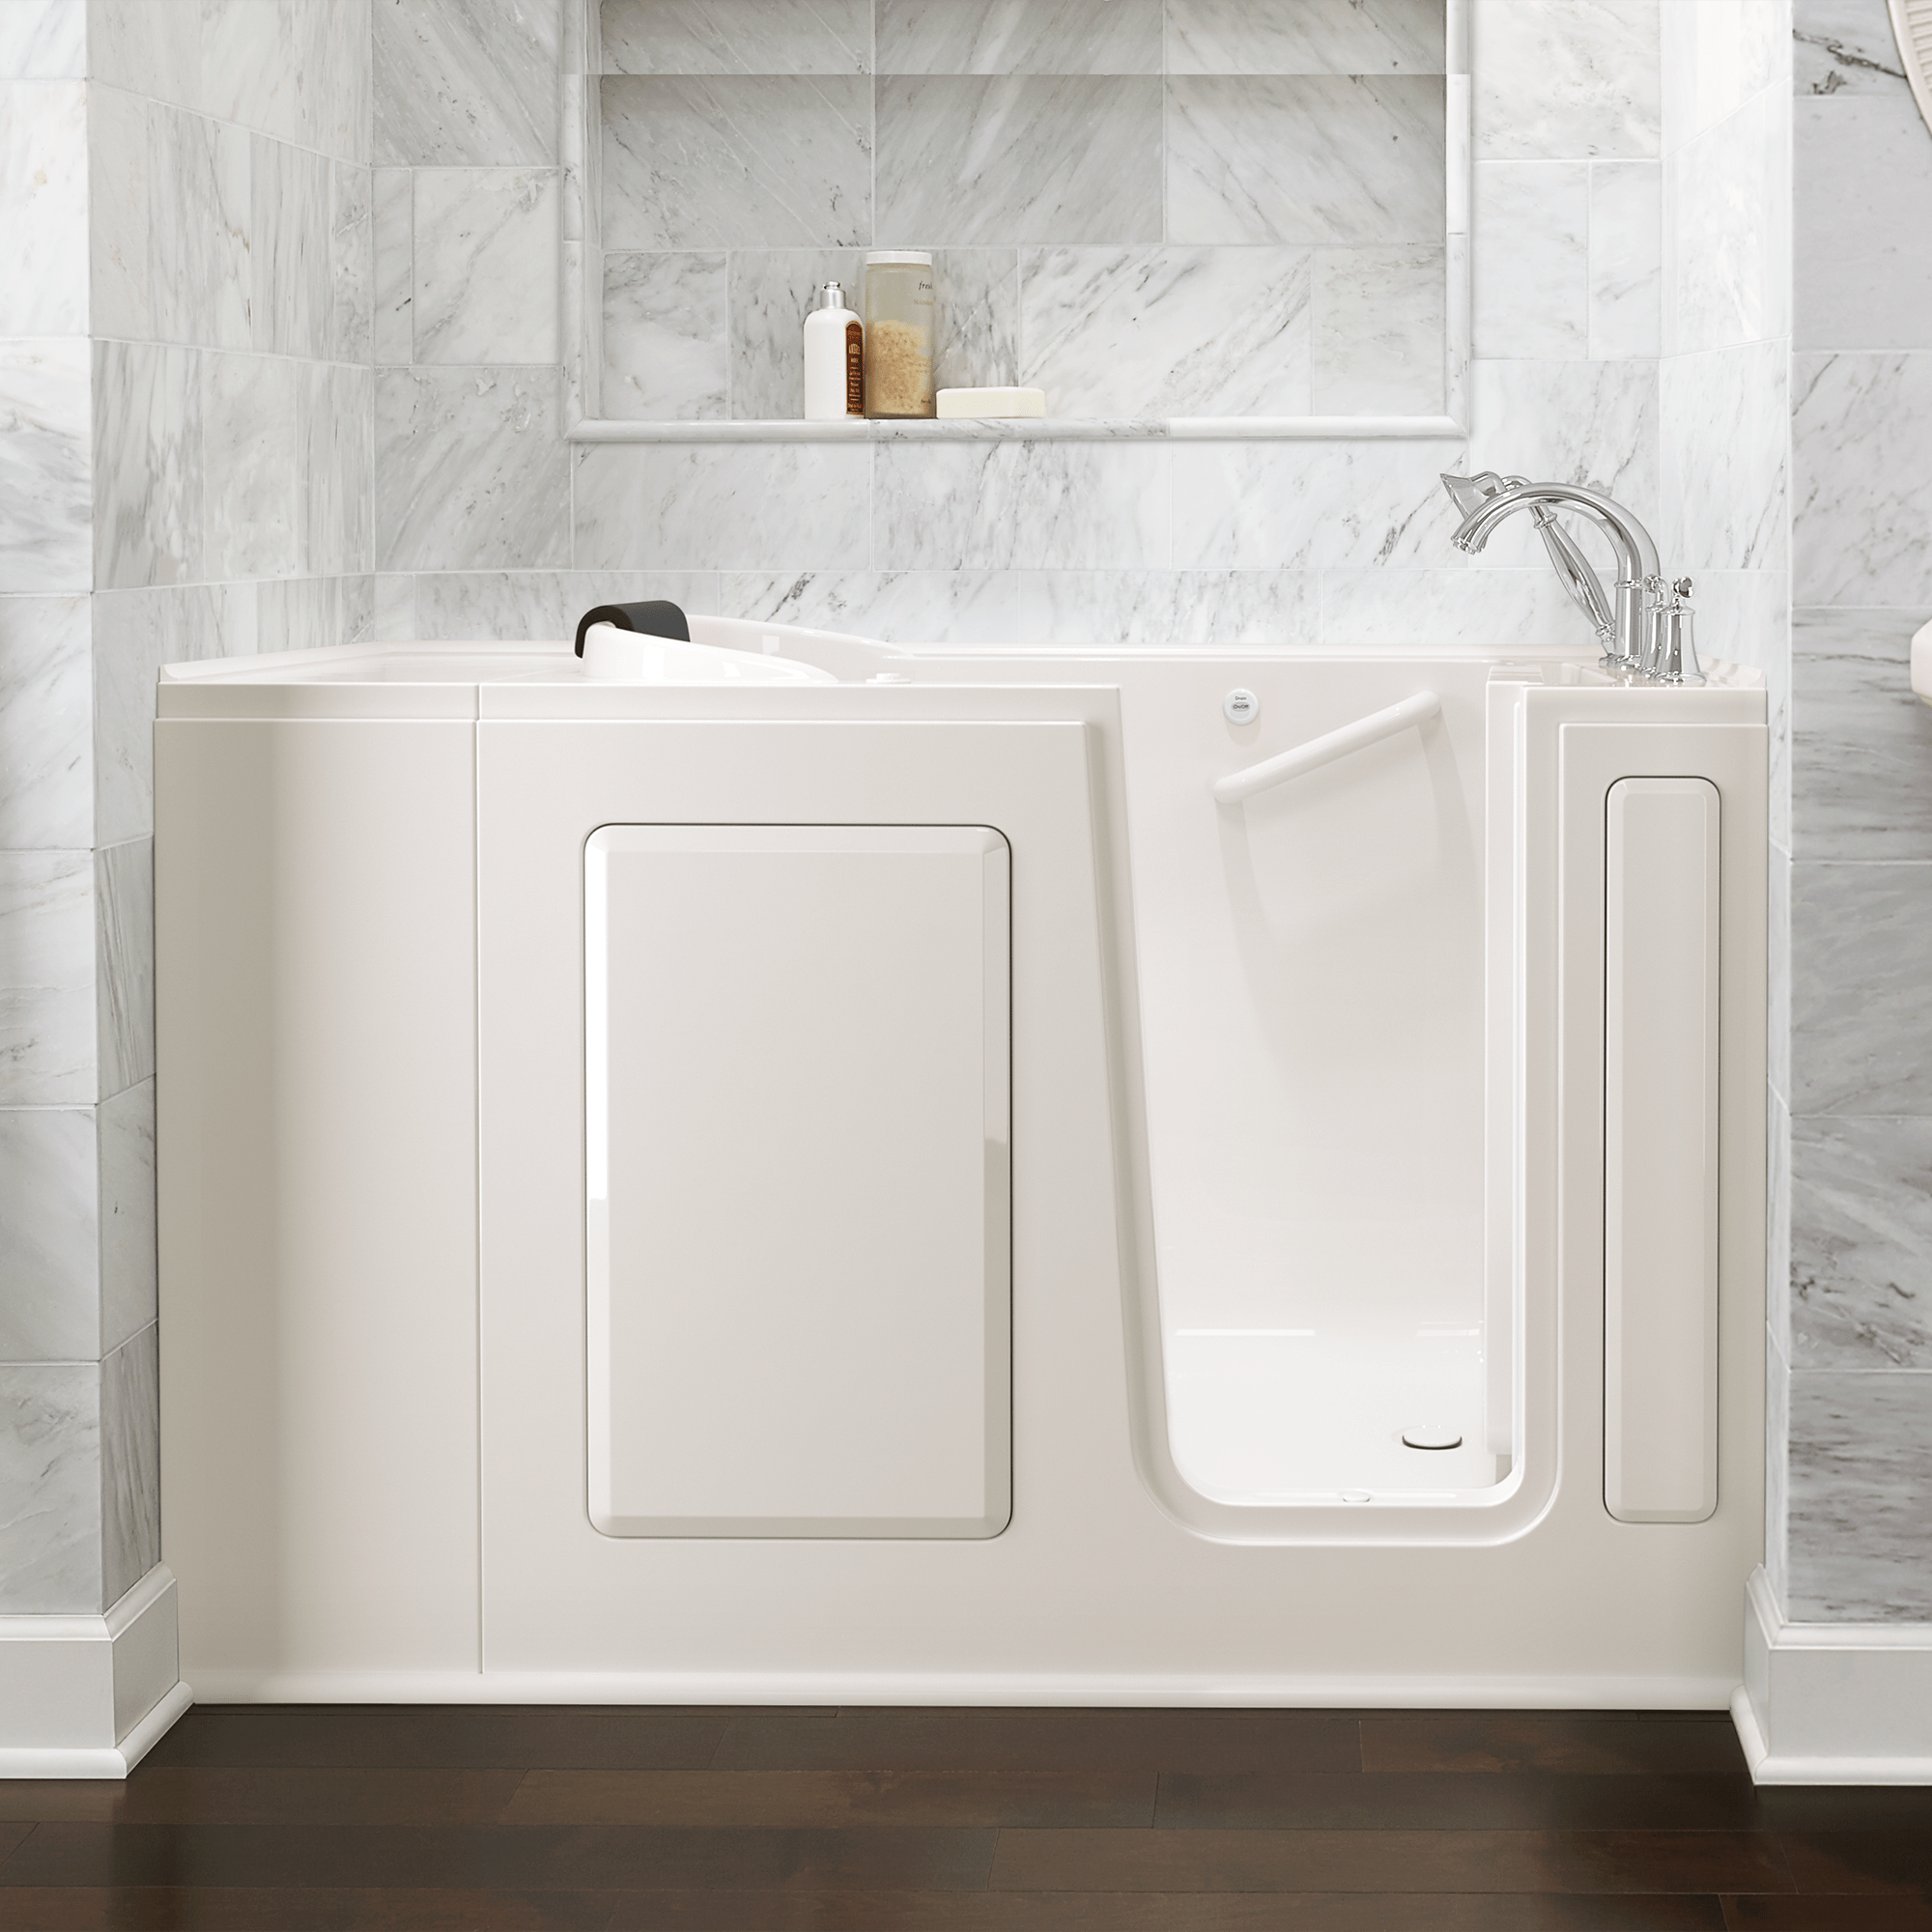 Gelcoat Premium Series 48x28 Inch Walk-In Bathtub with Air Massage System - Right Hand Door and Drain